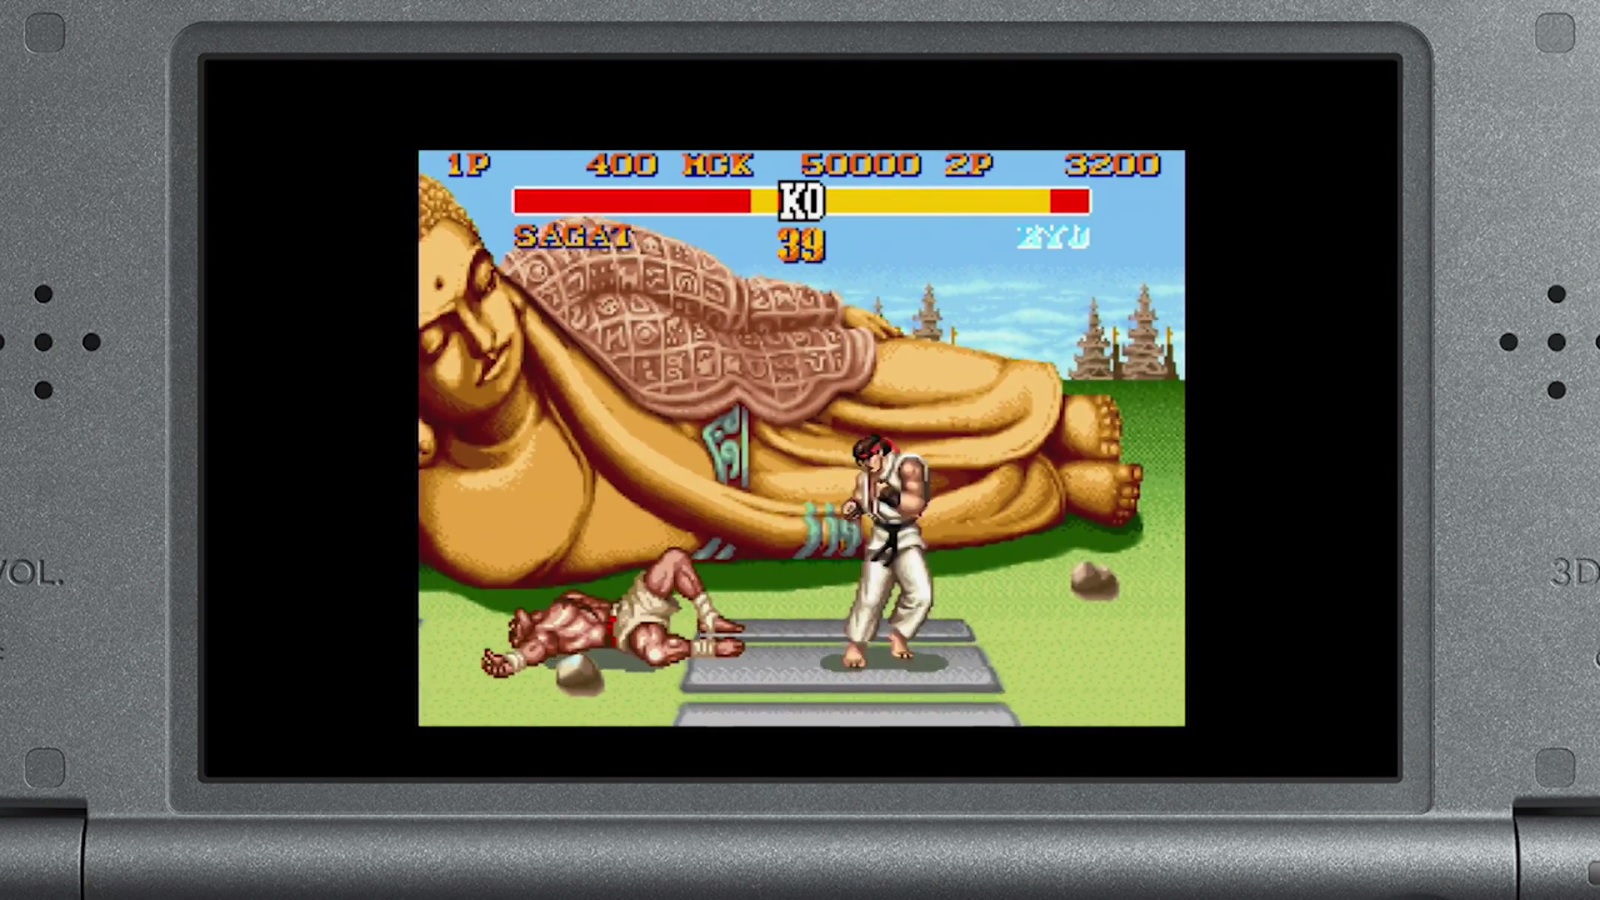 street fighter nintendo ds - ablessingtooneanother.org.